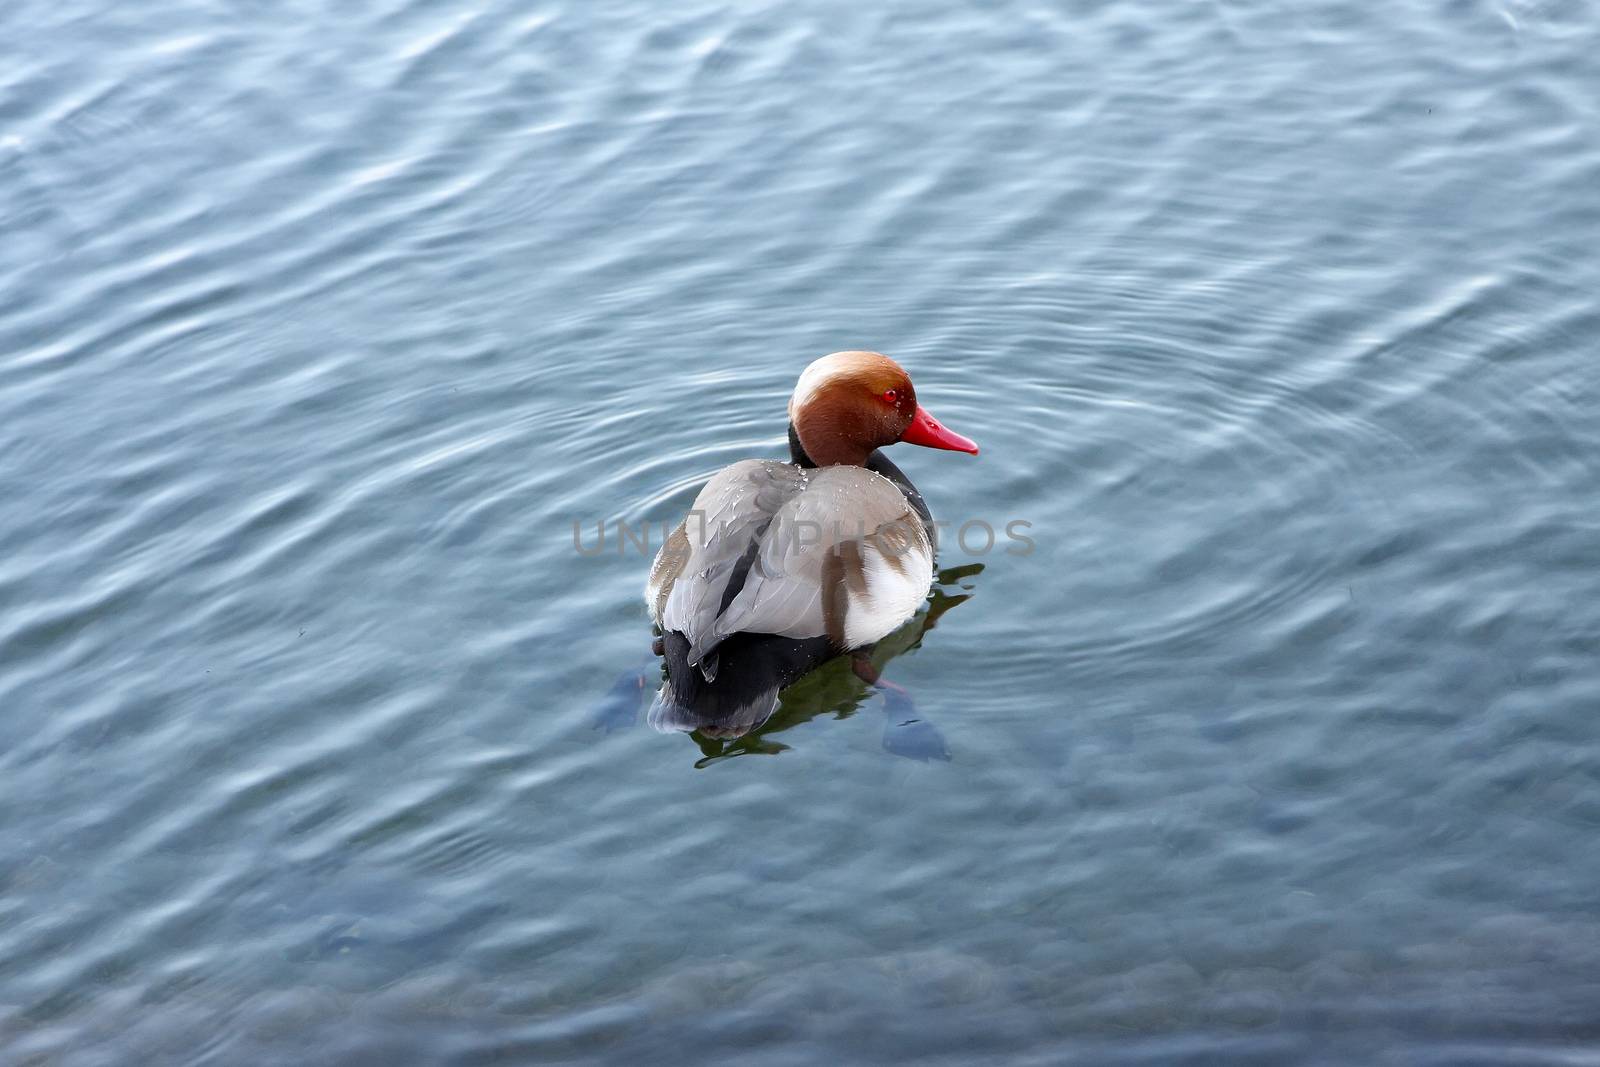 An image of a nice duck in the water